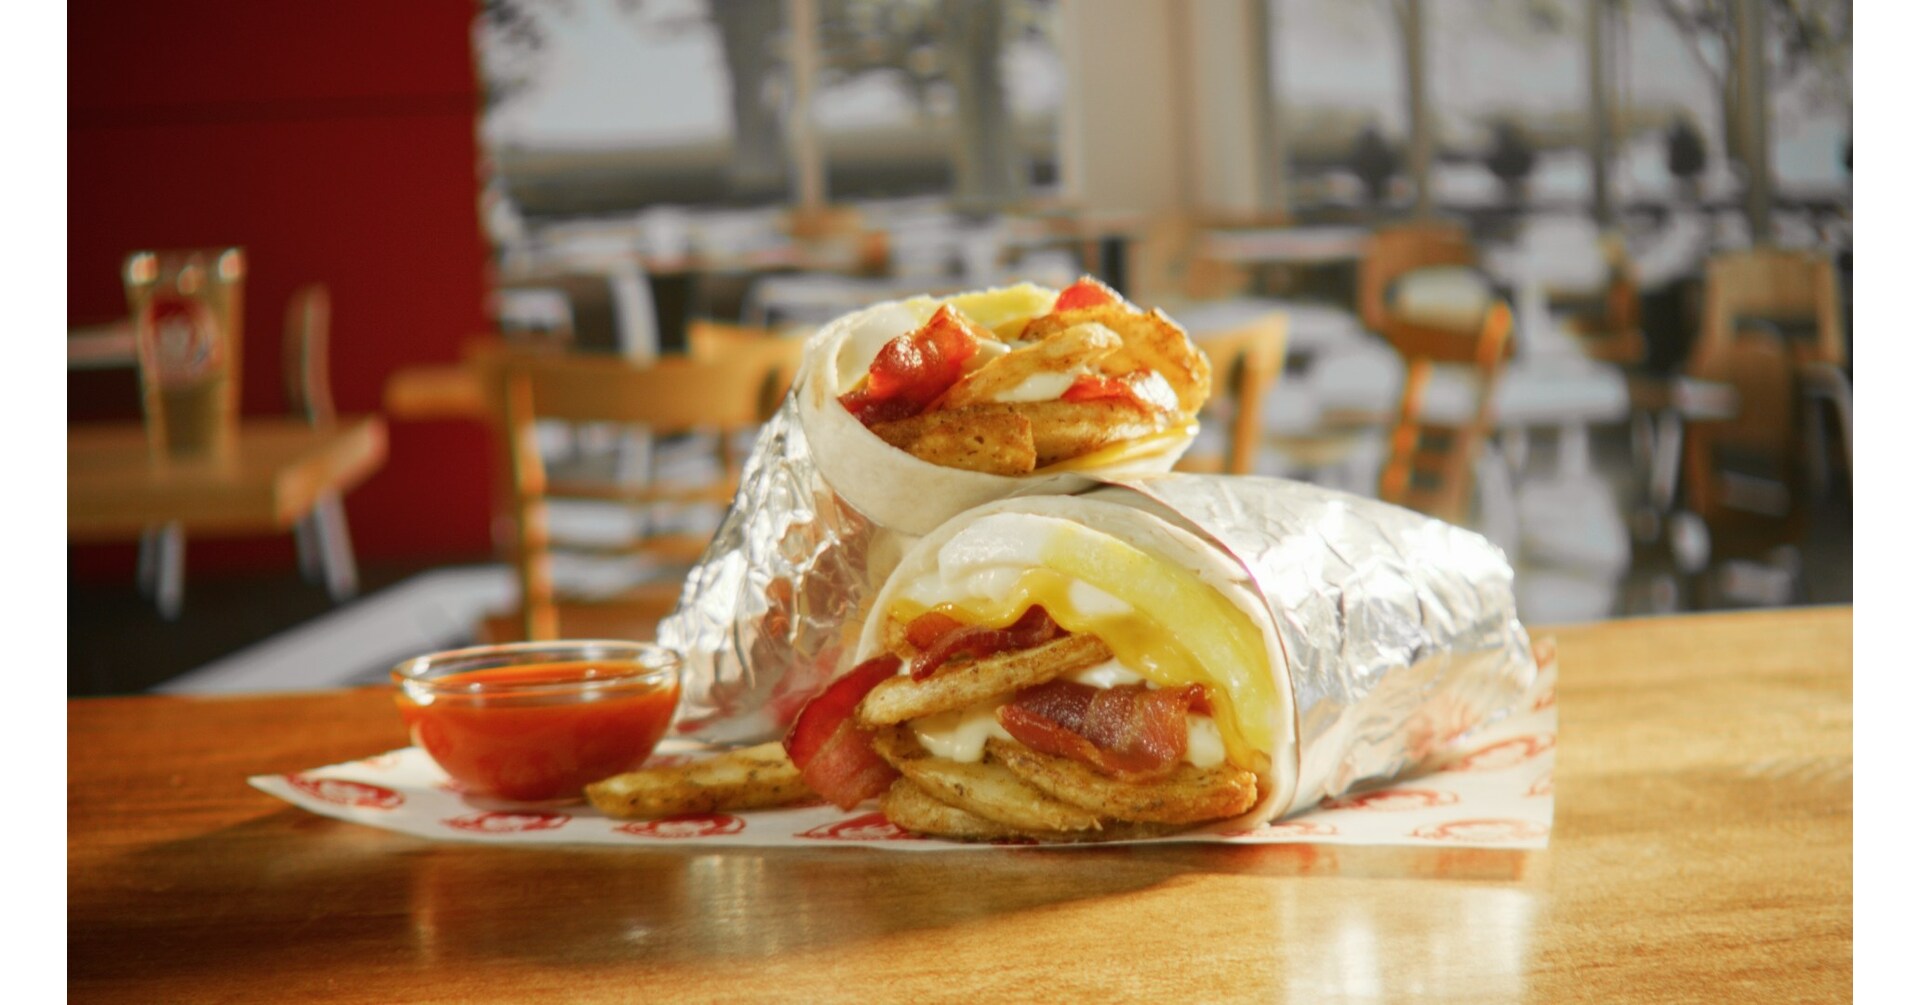 Breakfast Burrito - A Portable Morning Delight Breakfast Ideas to Start Your Day Right